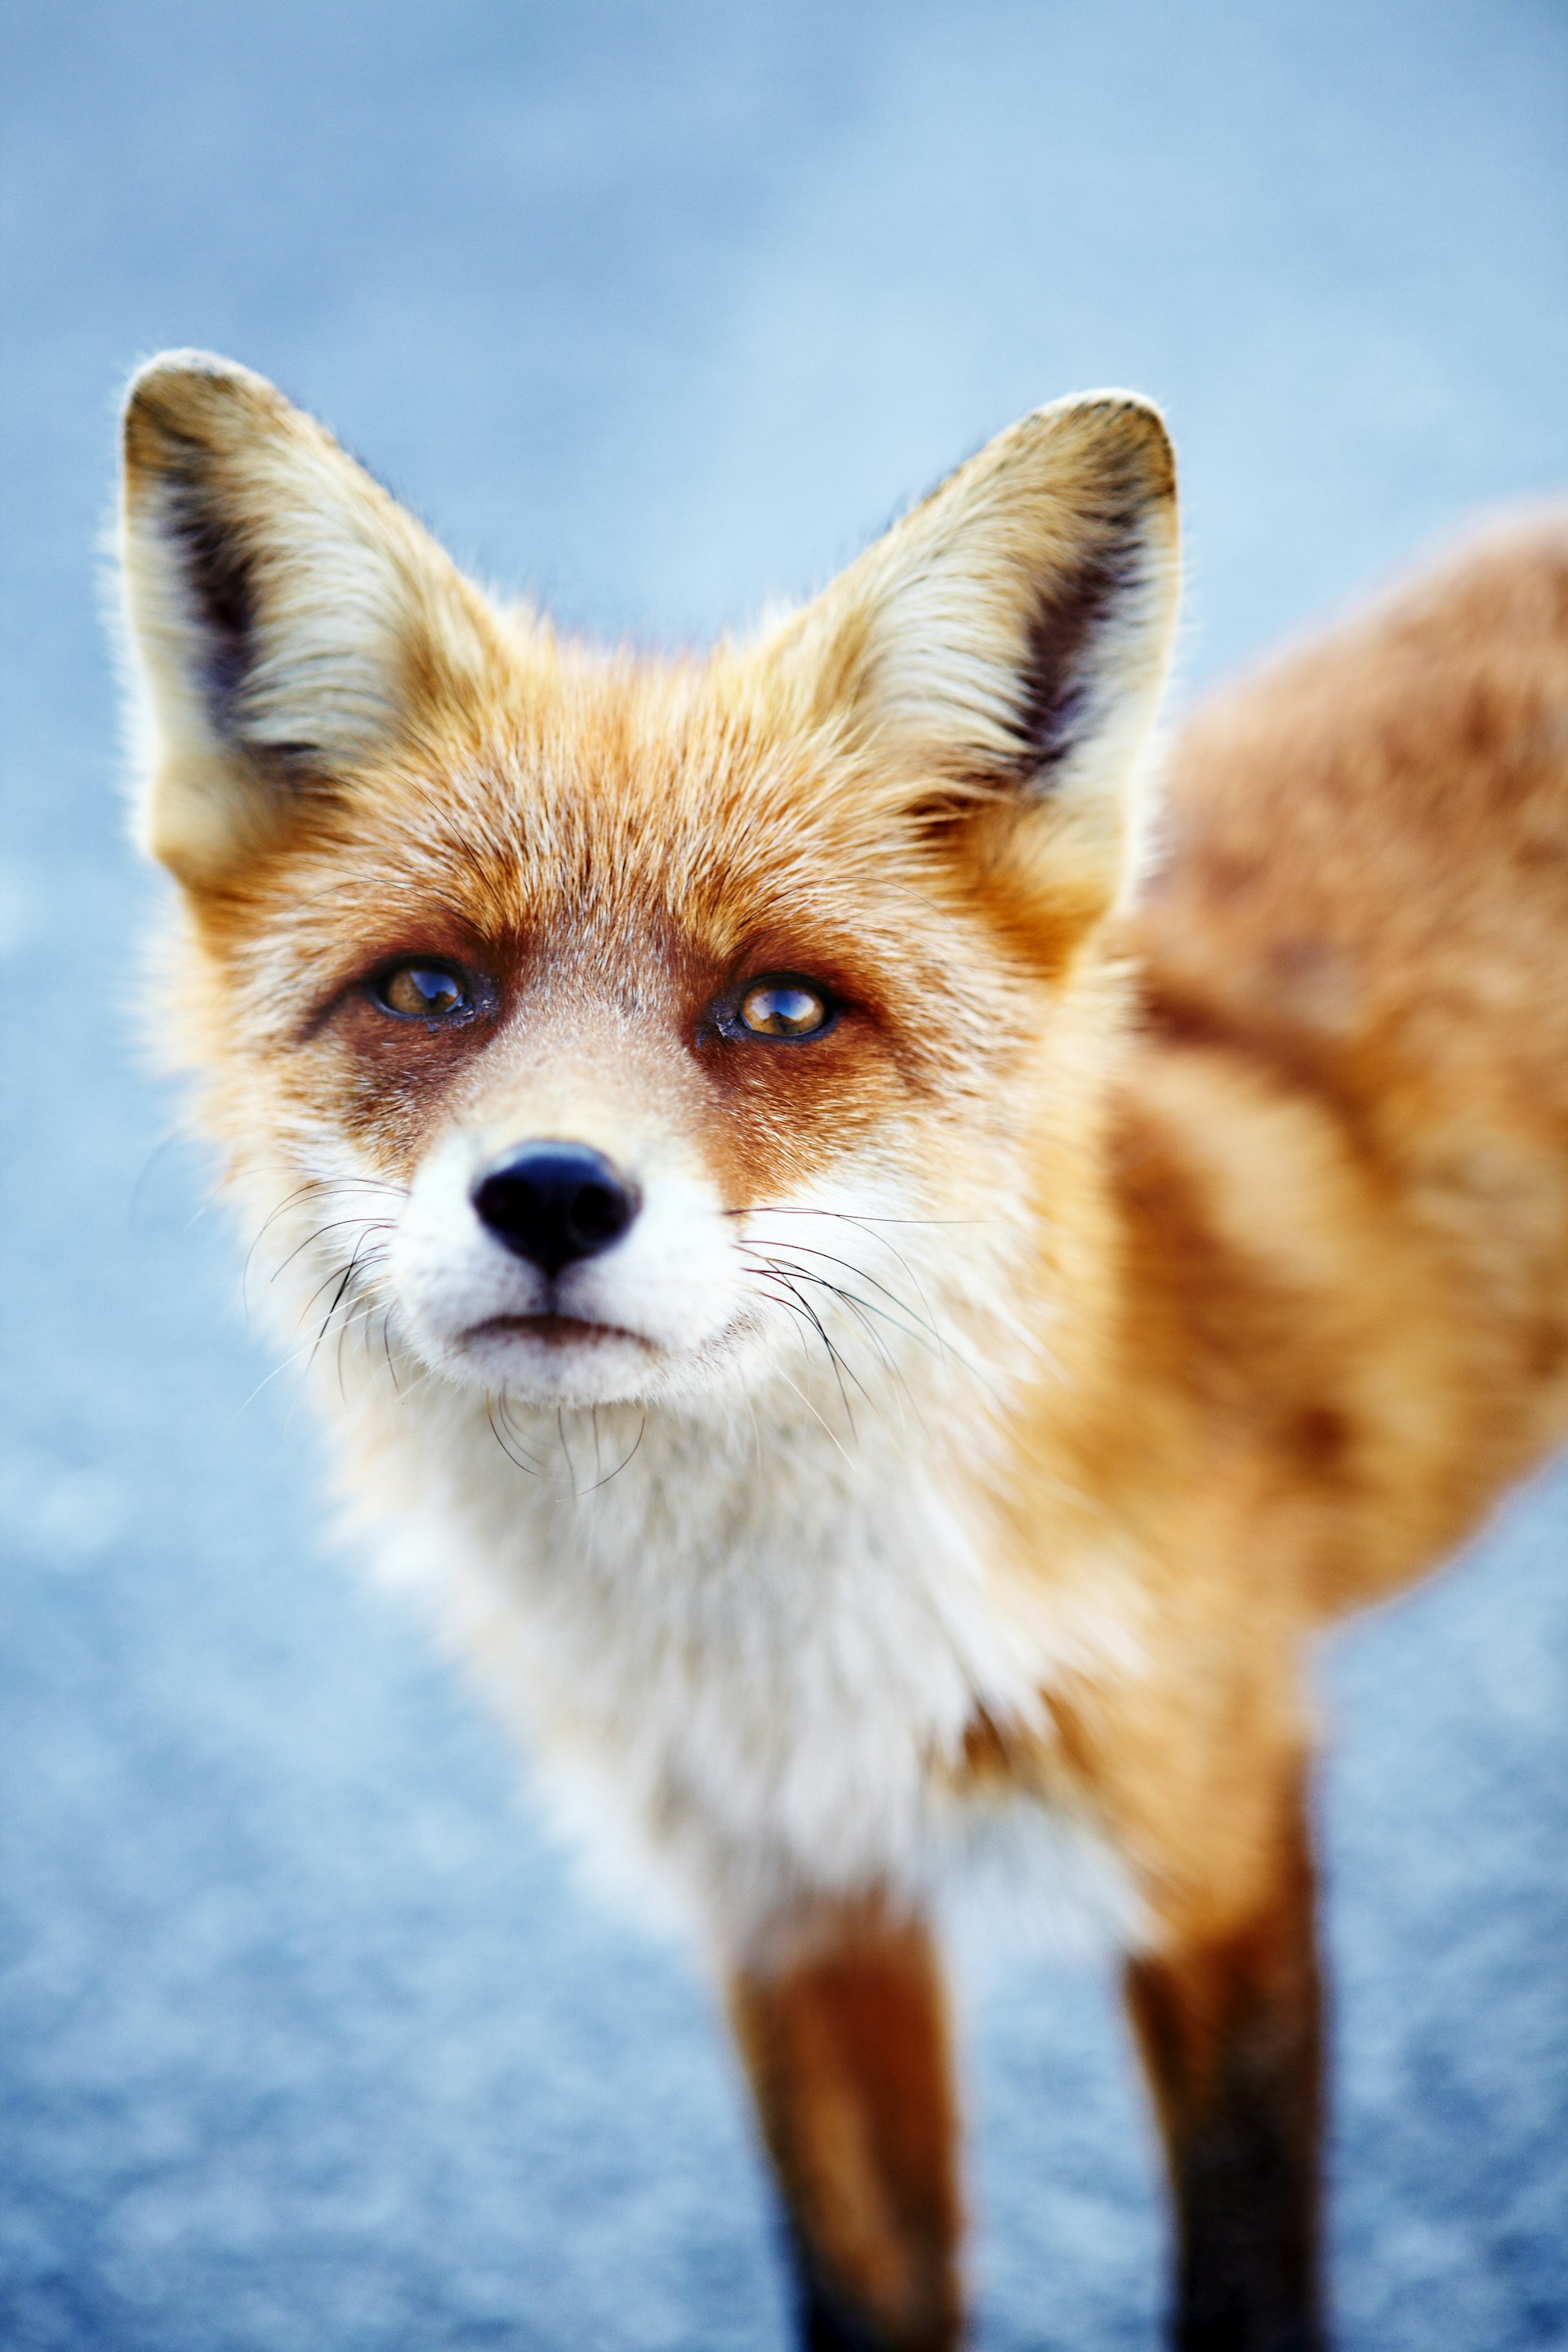 A fox looking directly at the camera